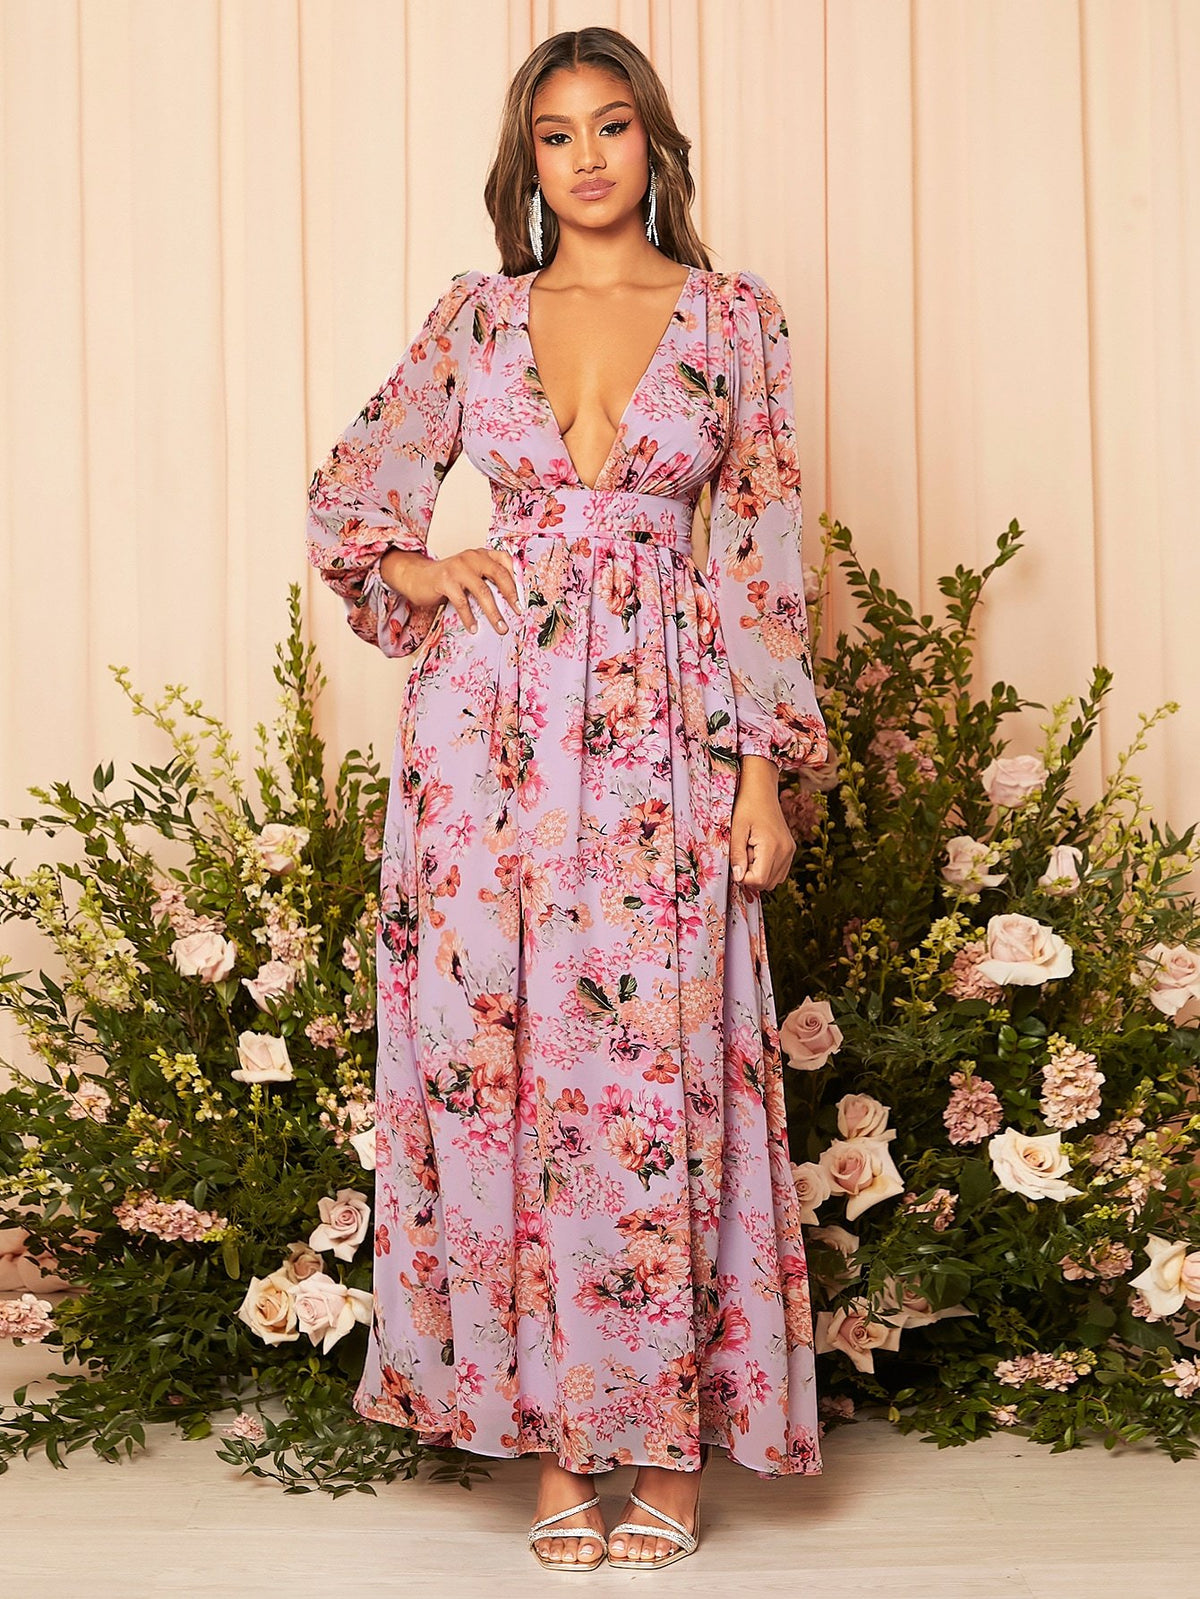 FLORAL BACKLESS MAXI DRESS